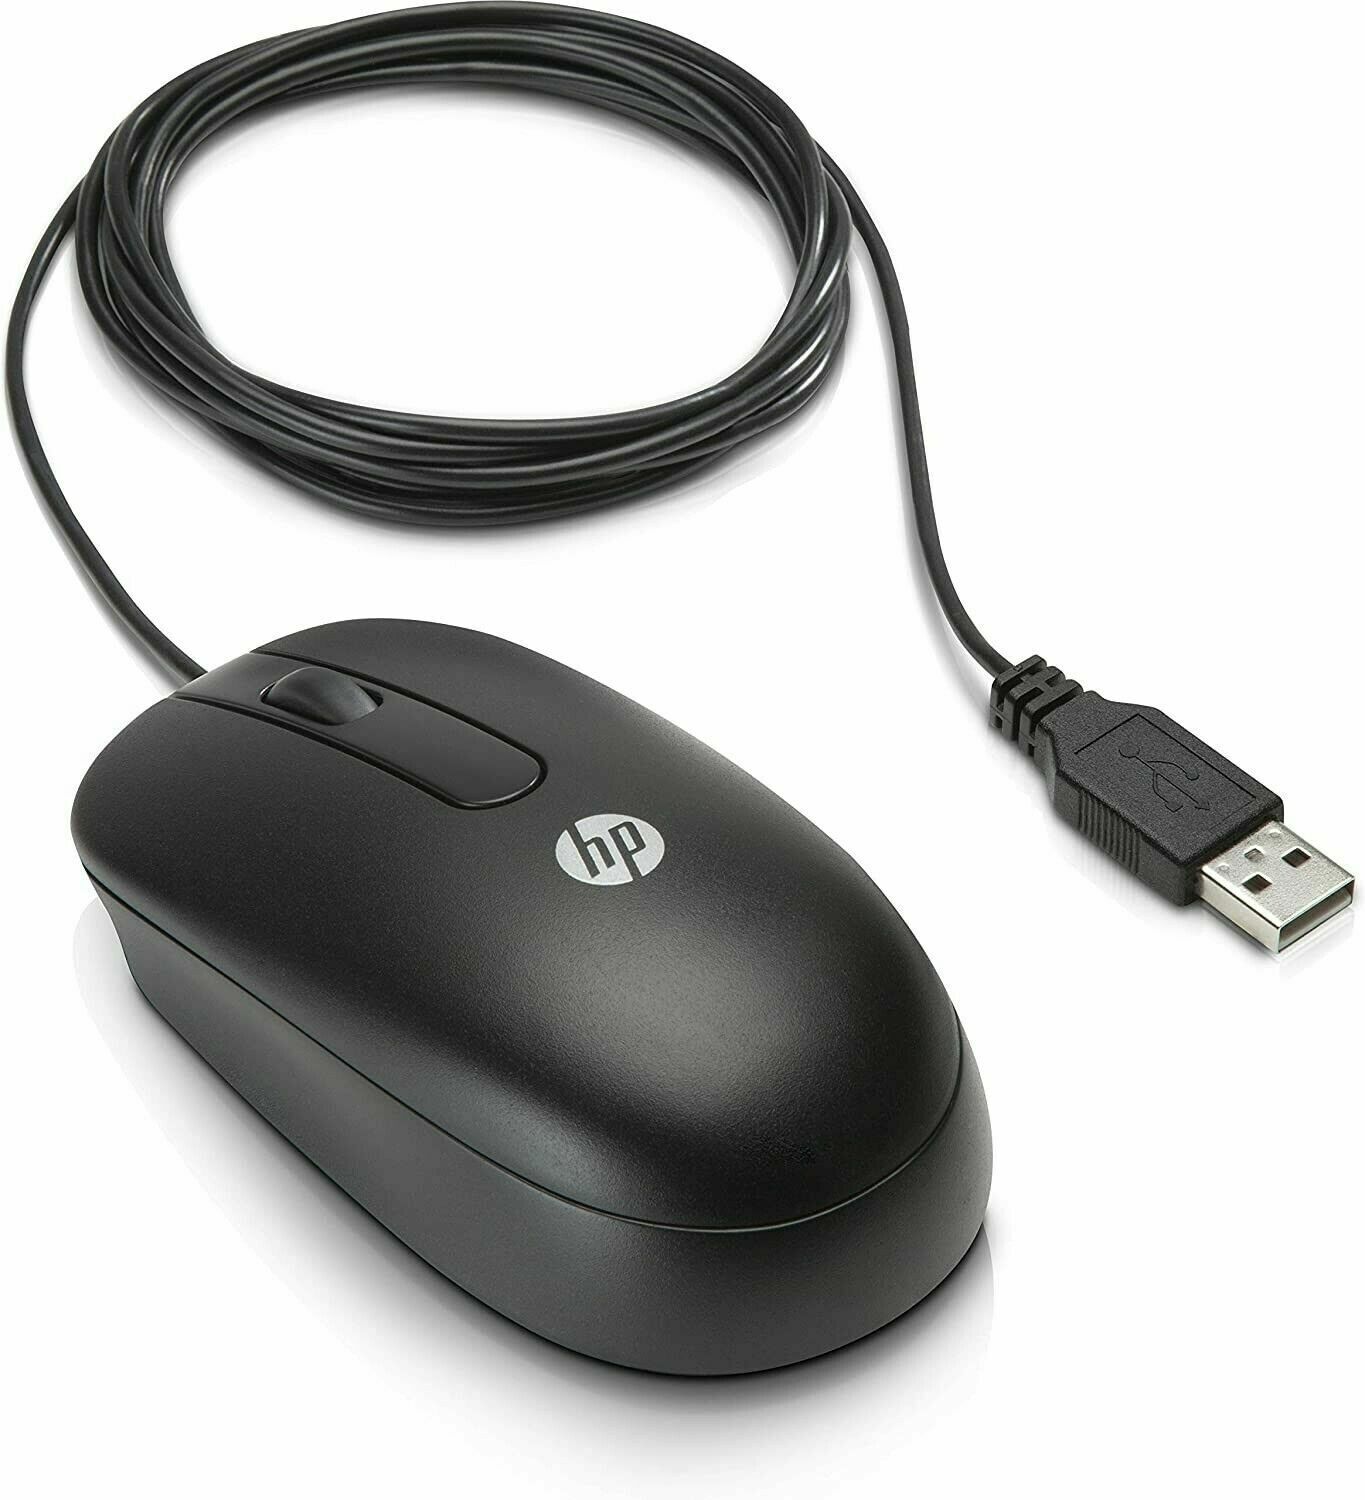 NEW Original HP Wired USB Optical DPI: 800 Mouse Black - QY777AA 